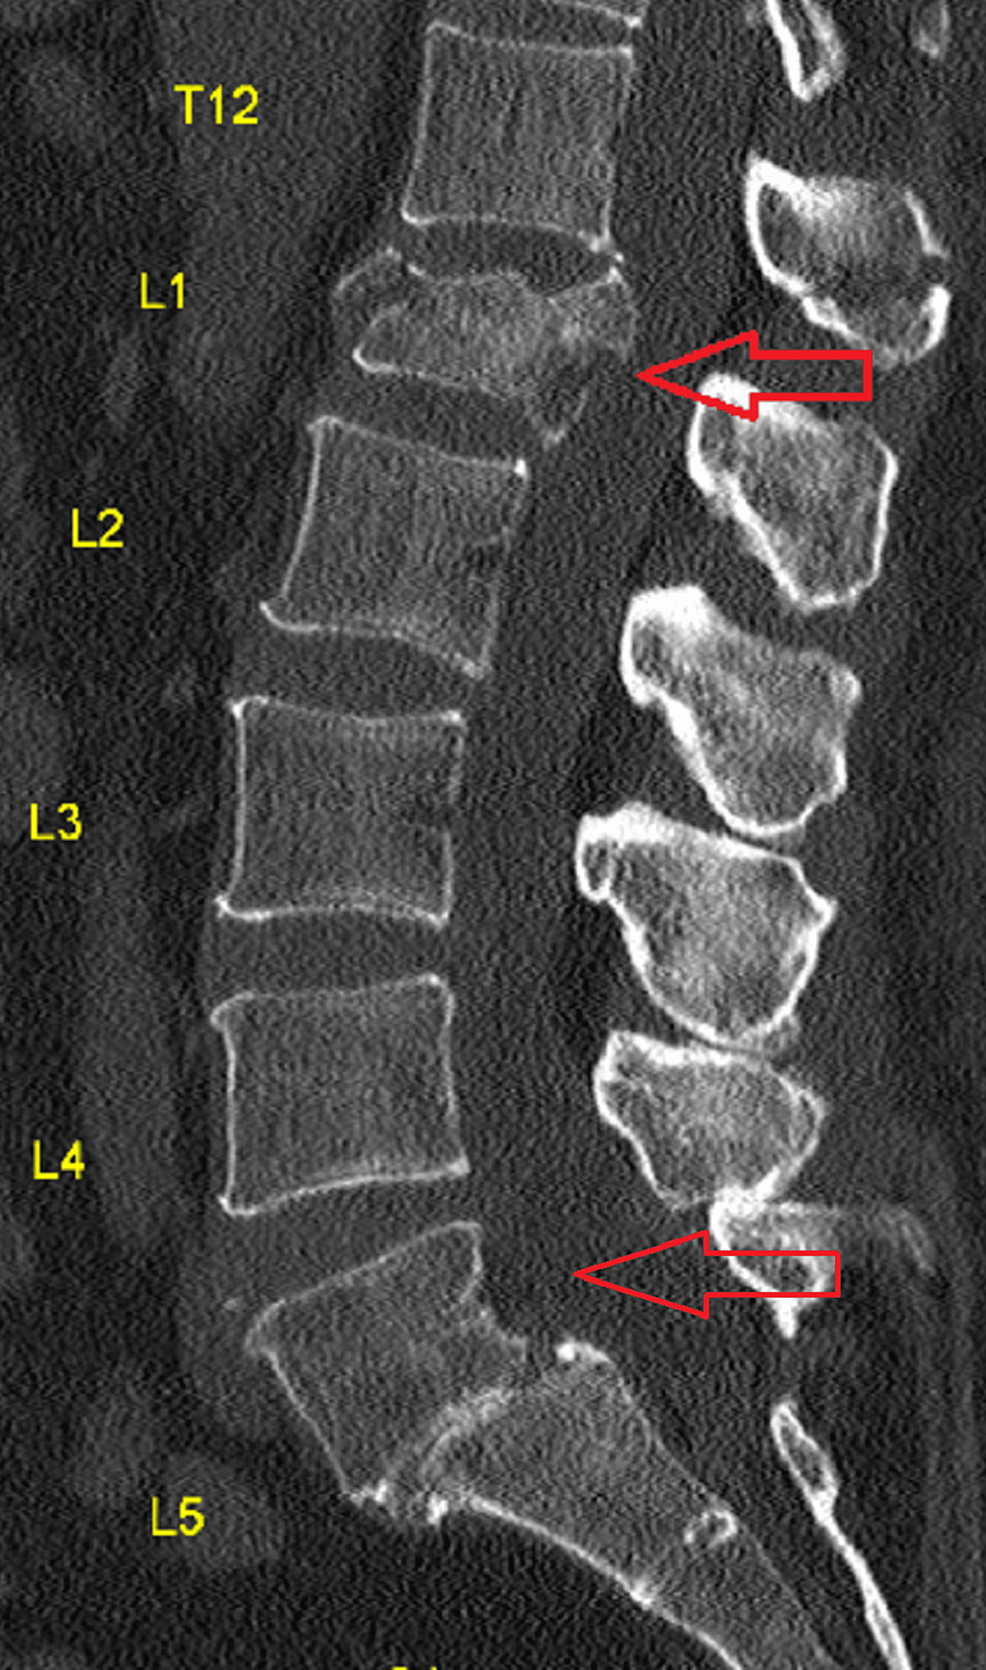 Acute and chronic vertebral compression fractures